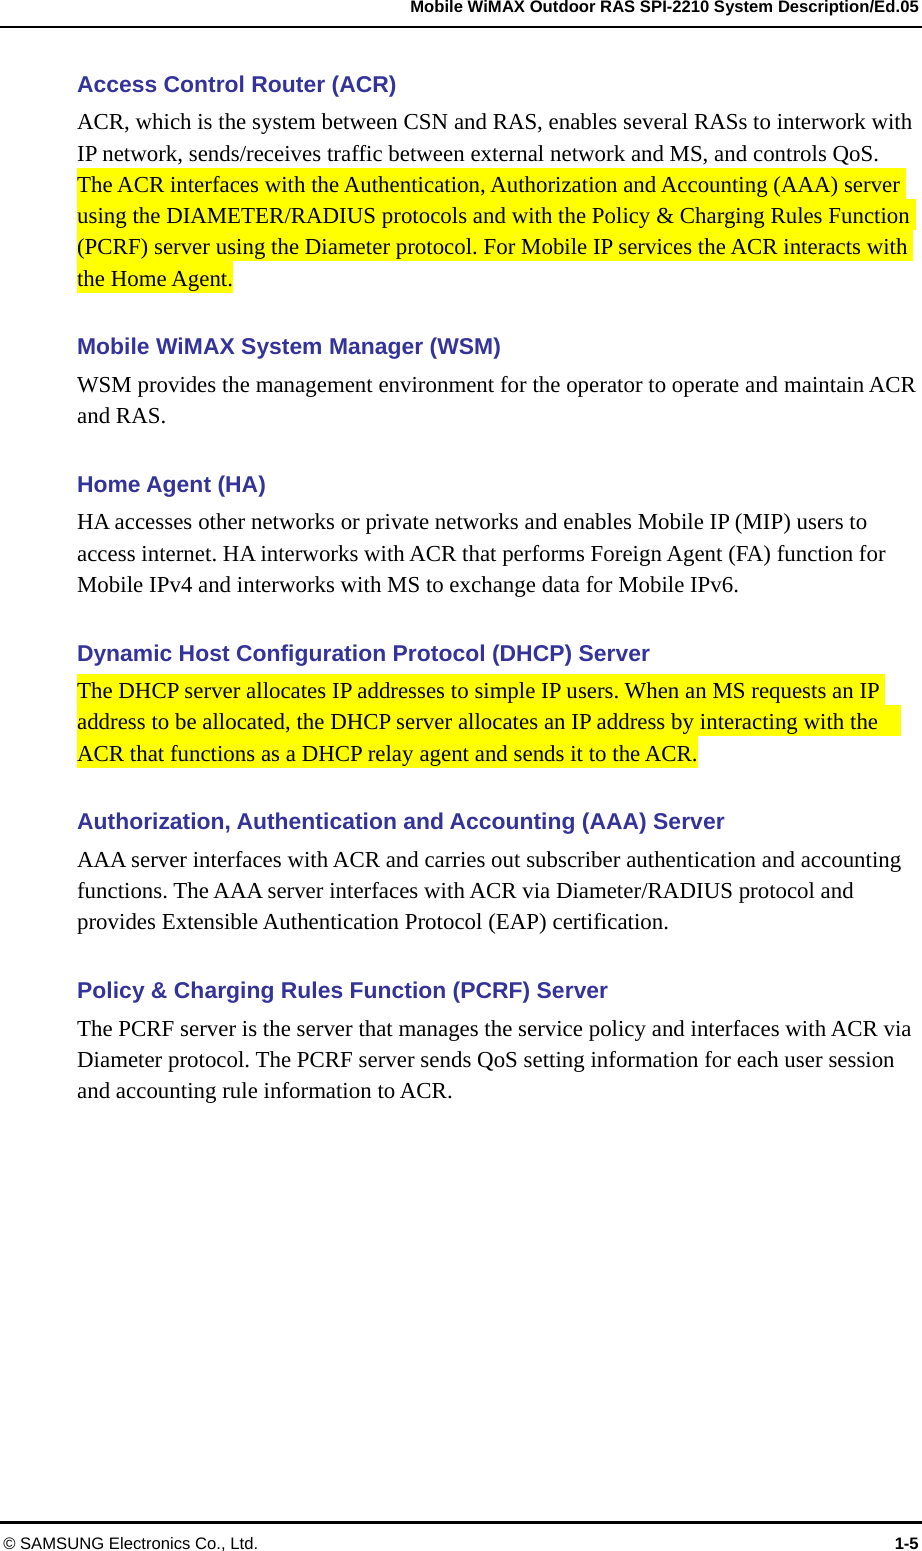   Mobile WiMAX Outdoor RAS SPI-2210 System Description/Ed.05 © SAMSUNG Electronics Co., Ltd.  1-5 Access Control Router (ACR) ACR, which is the system between CSN and RAS, enables several RASs to interwork with IP network, sends/receives traffic between external network and MS, and controls QoS. The ACR interfaces with the Authentication, Authorization and Accounting (AAA) server using the DIAMETER/RADIUS protocols and with the Policy &amp; Charging Rules Function (PCRF) server using the Diameter protocol. For Mobile IP services the ACR interacts with the Home Agent.    Mobile WiMAX System Manager (WSM) WSM provides the management environment for the operator to operate and maintain ACR and RAS.  Home Agent (HA) HA accesses other networks or private networks and enables Mobile IP (MIP) users to access internet. HA interworks with ACR that performs Foreign Agent (FA) function for Mobile IPv4 and interworks with MS to exchange data for Mobile IPv6.  Dynamic Host Configuration Protocol (DHCP) Server The DHCP server allocates IP addresses to simple IP users. When an MS requests an IP address to be allocated, the DHCP server allocates an IP address by interacting with the   ACR that functions as a DHCP relay agent and sends it to the ACR.  Authorization, Authentication and Accounting (AAA) Server AAA server interfaces with ACR and carries out subscriber authentication and accounting functions. The AAA server interfaces with ACR via Diameter/RADIUS protocol and provides Extensible Authentication Protocol (EAP) certification.  Policy &amp; Charging Rules Function (PCRF) Server   The PCRF server is the server that manages the service policy and interfaces with ACR via Diameter protocol. The PCRF server sends QoS setting information for each user session and accounting rule information to ACR. 